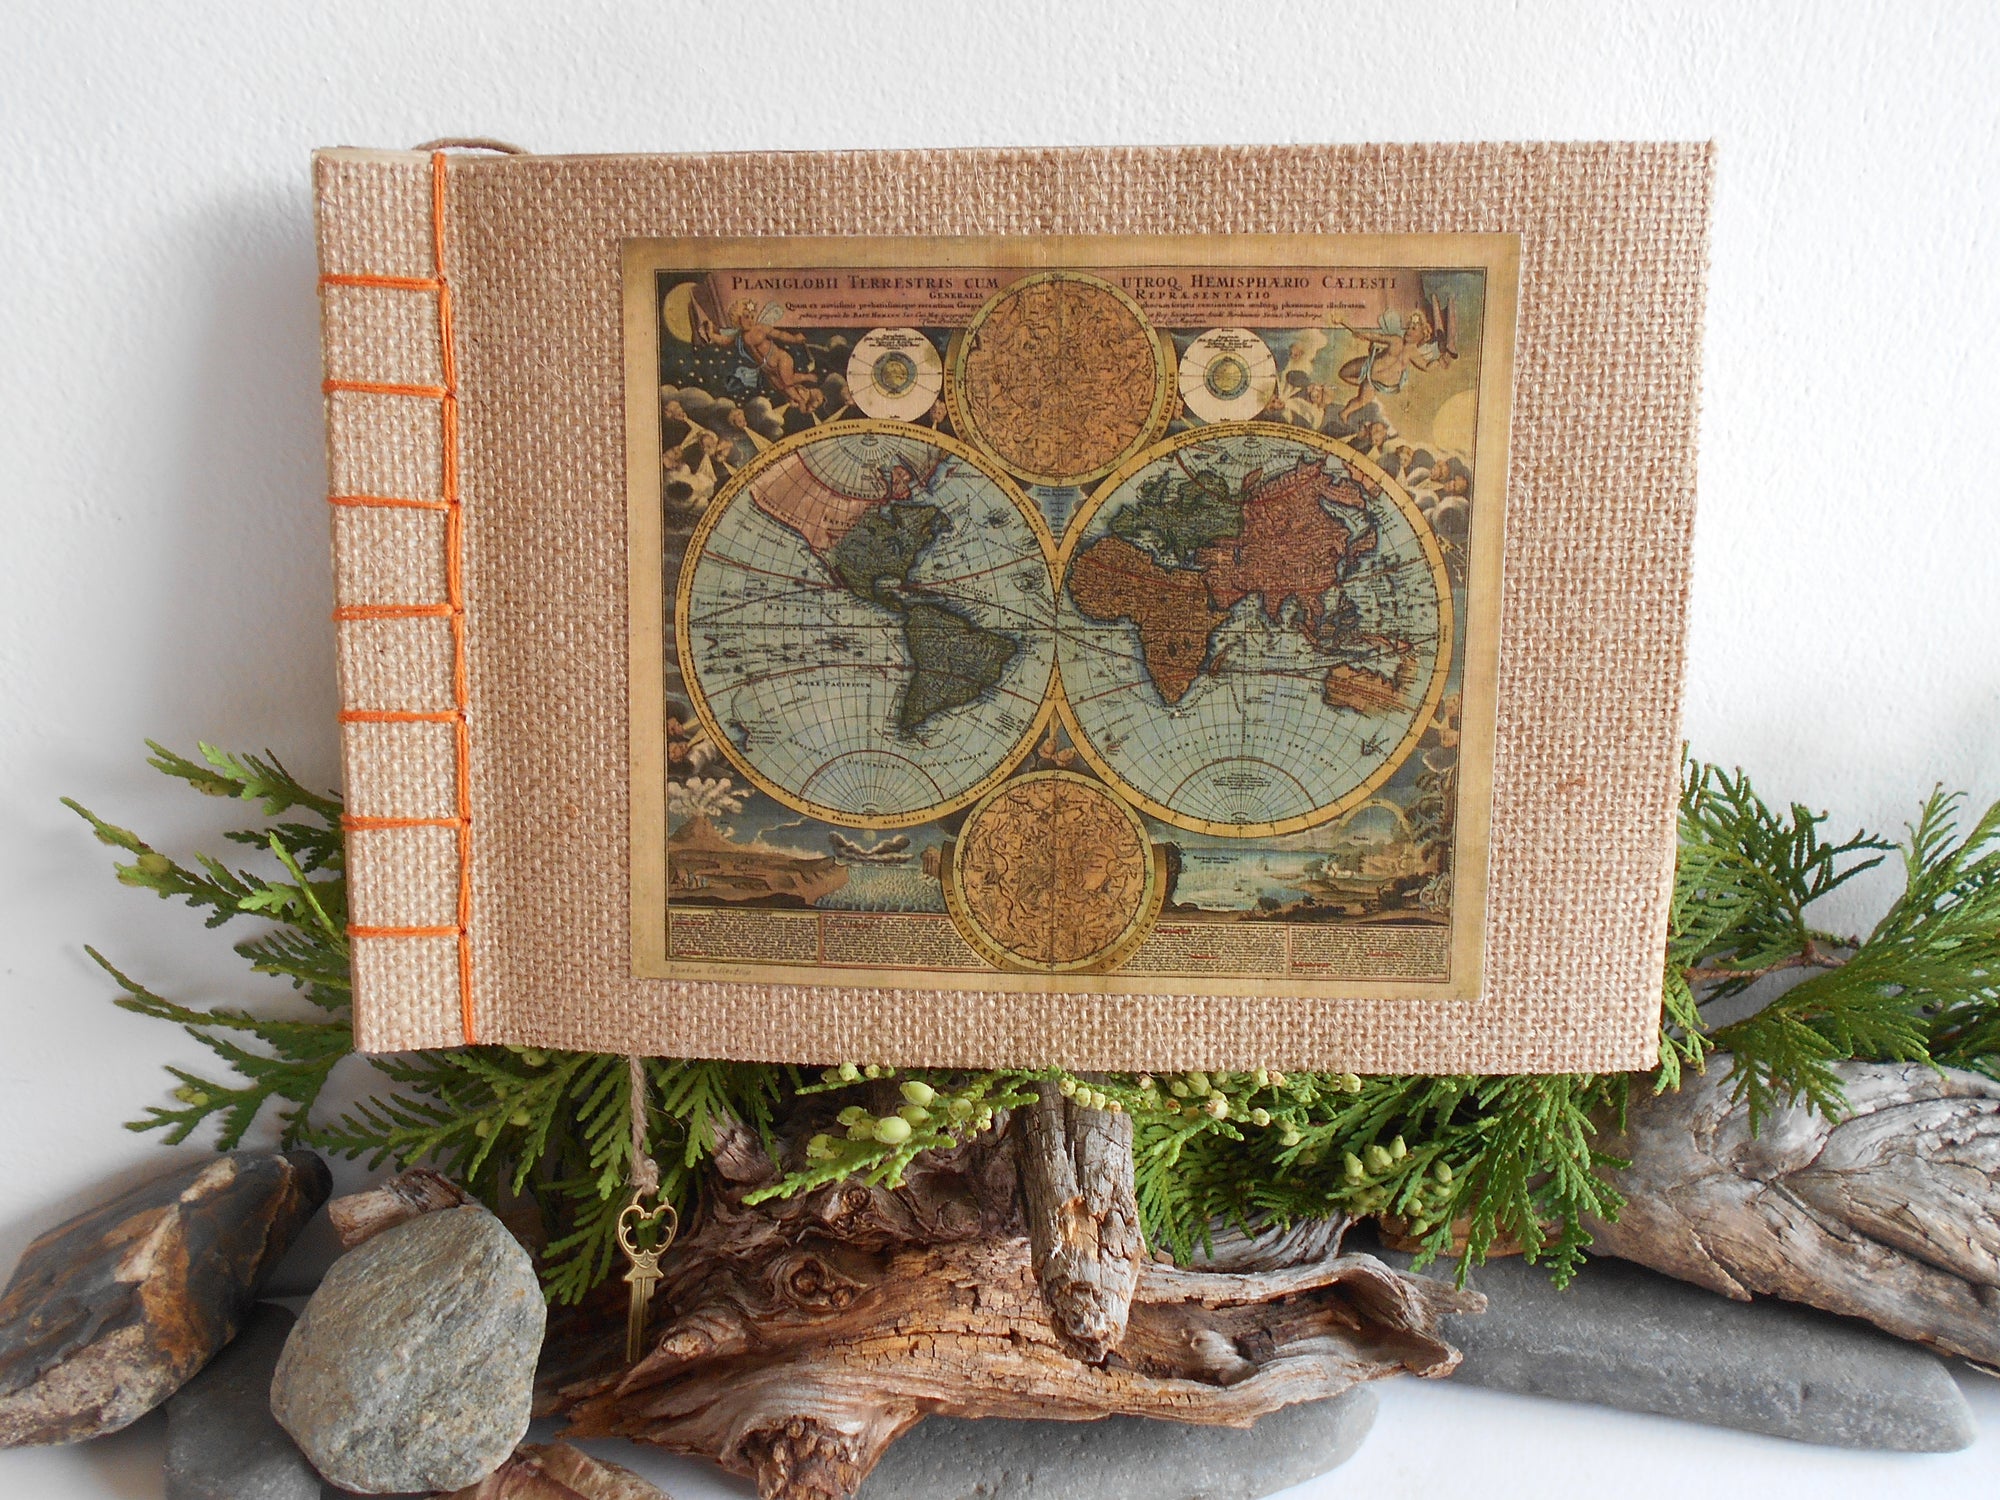 Handmade travel sketchbook with burlap covers and a fine old world map print on the front cover and bound with Japanese stab binding with an orange thread and a bookmark by ExiArts eco-friendly company from Bulgaria.